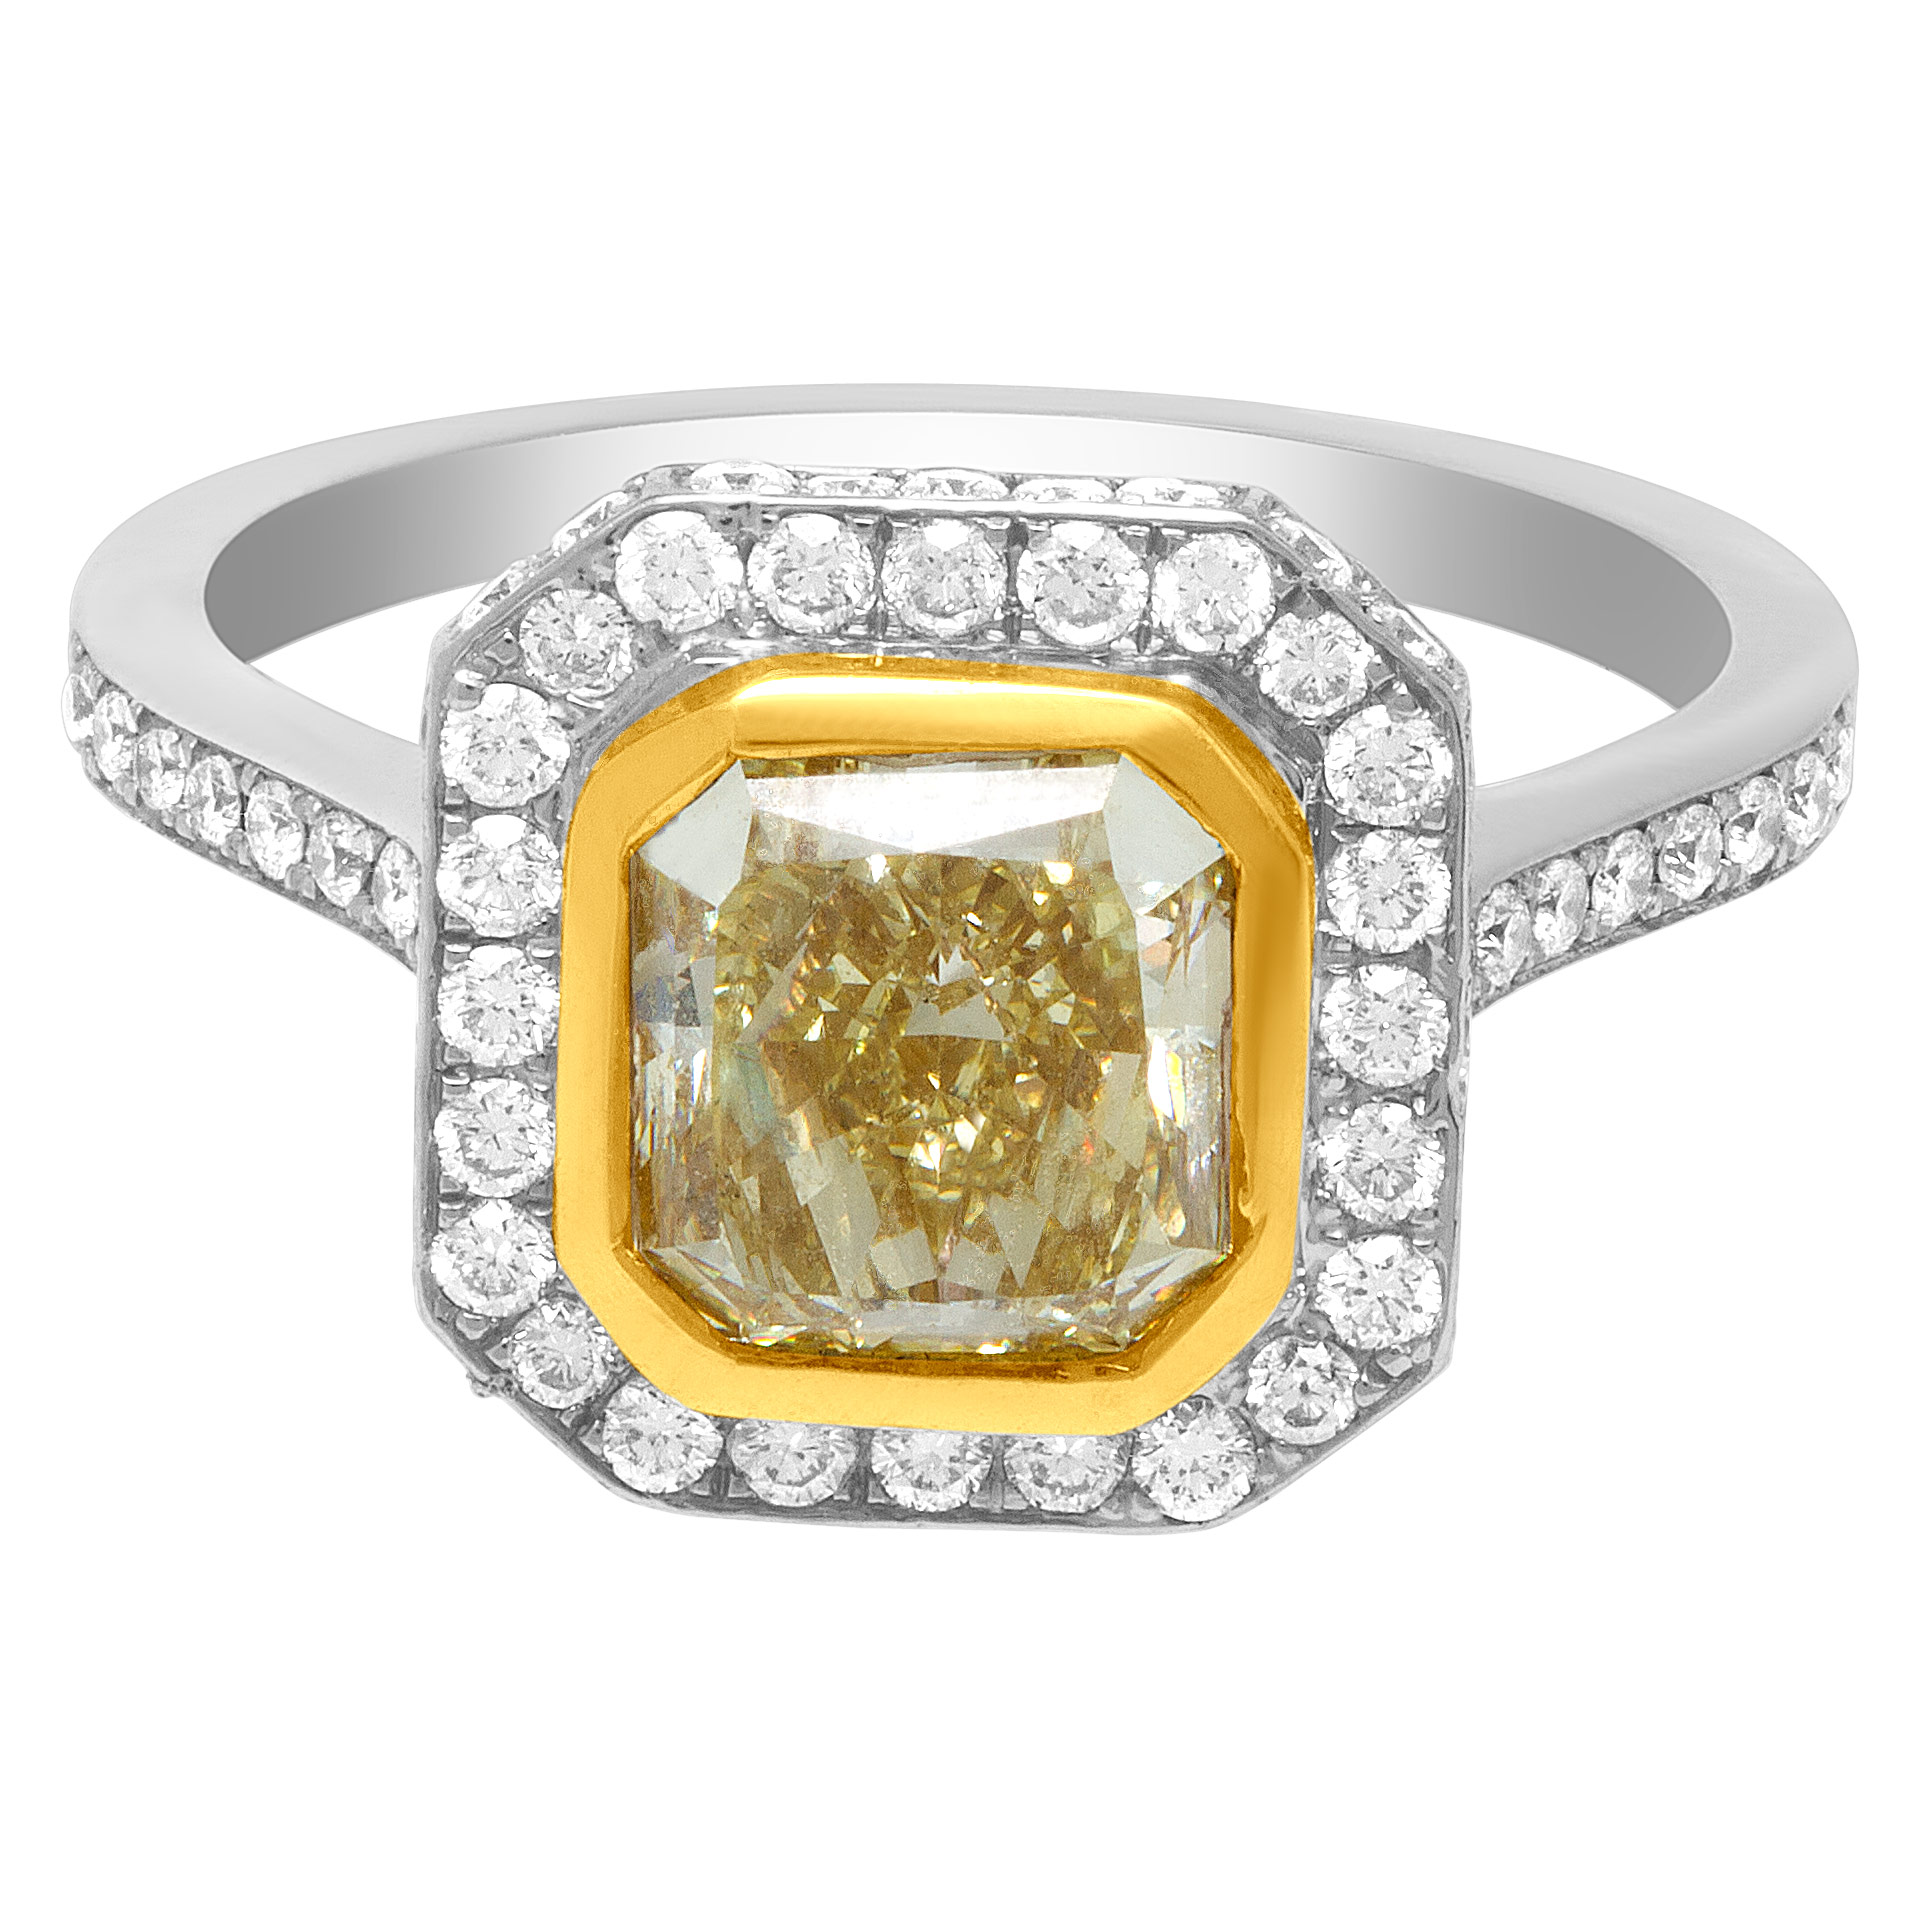 GIA certified 2.38 cts. radiant cut natural fancy yellow, SI1 clarity Diamond set in 14k w/g approx. 0.57 cts in diamonds